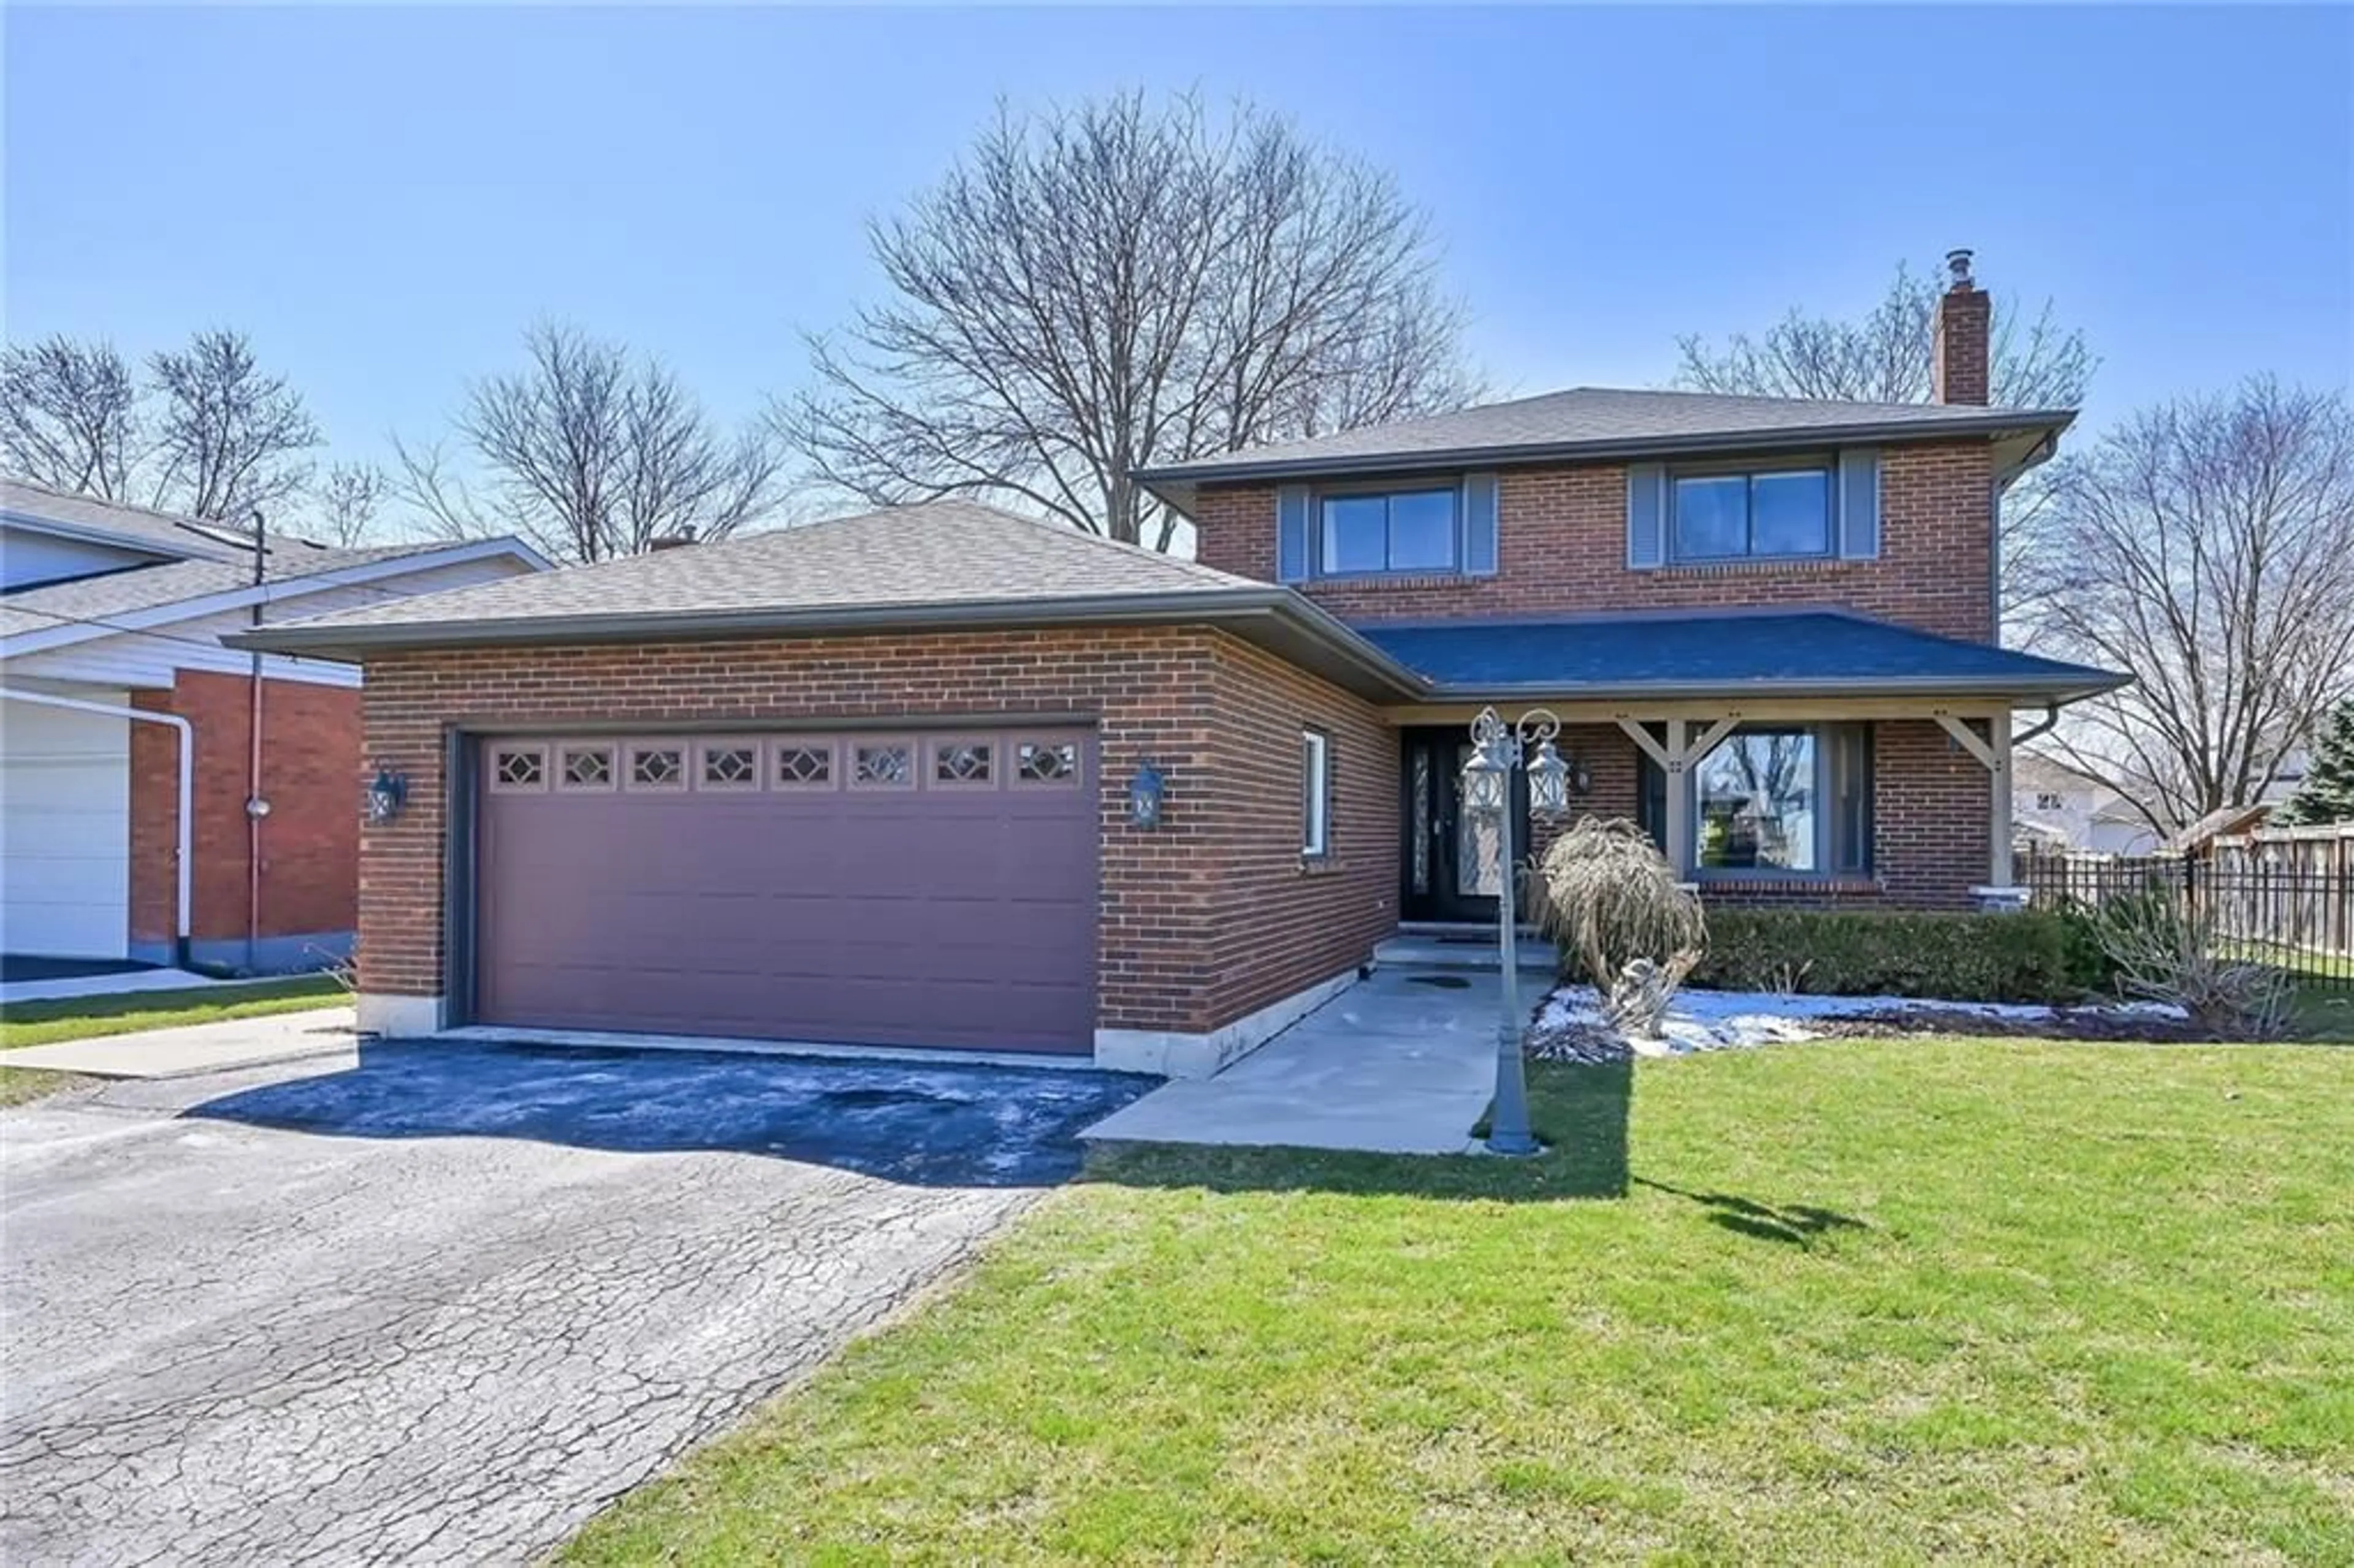 Home with brick exterior material for 352 MacCrae Dr, Caledonia Ontario N3W 1K6